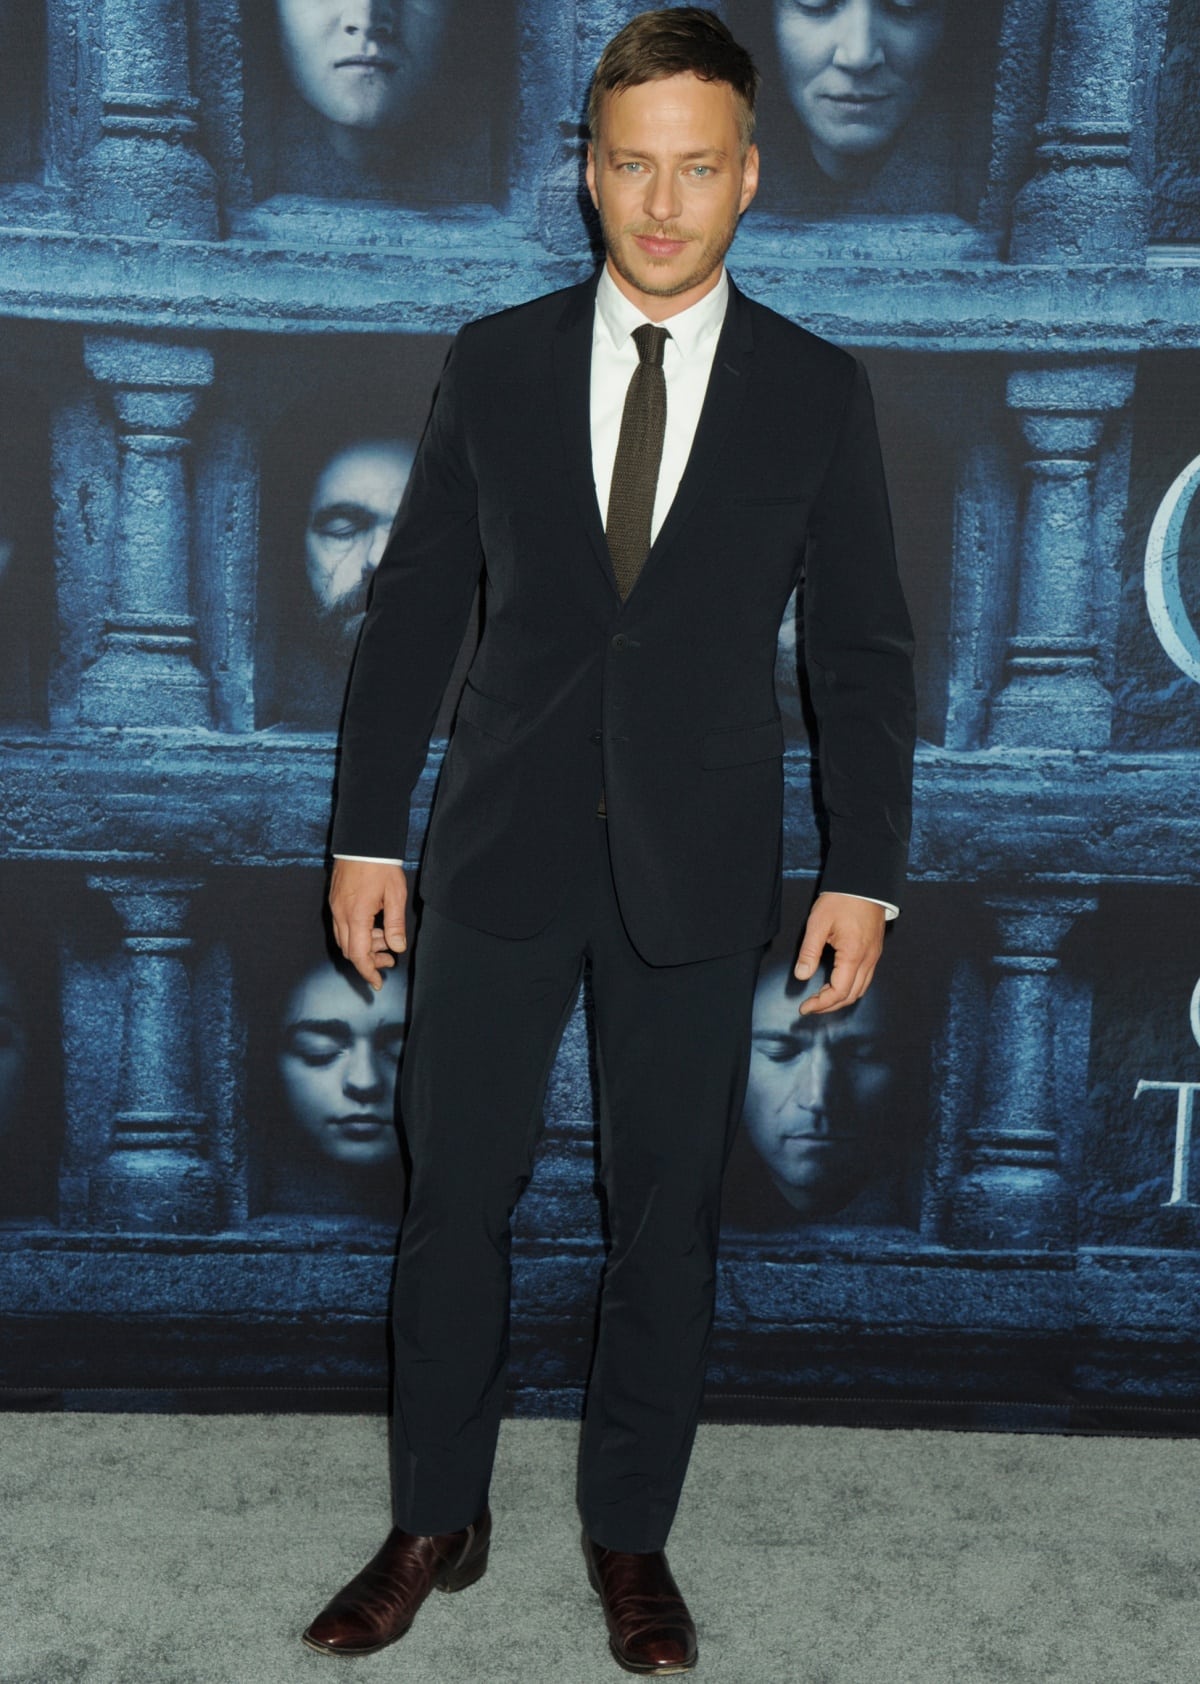 Tom Wlaschiha at the premiere of Game of Thrones